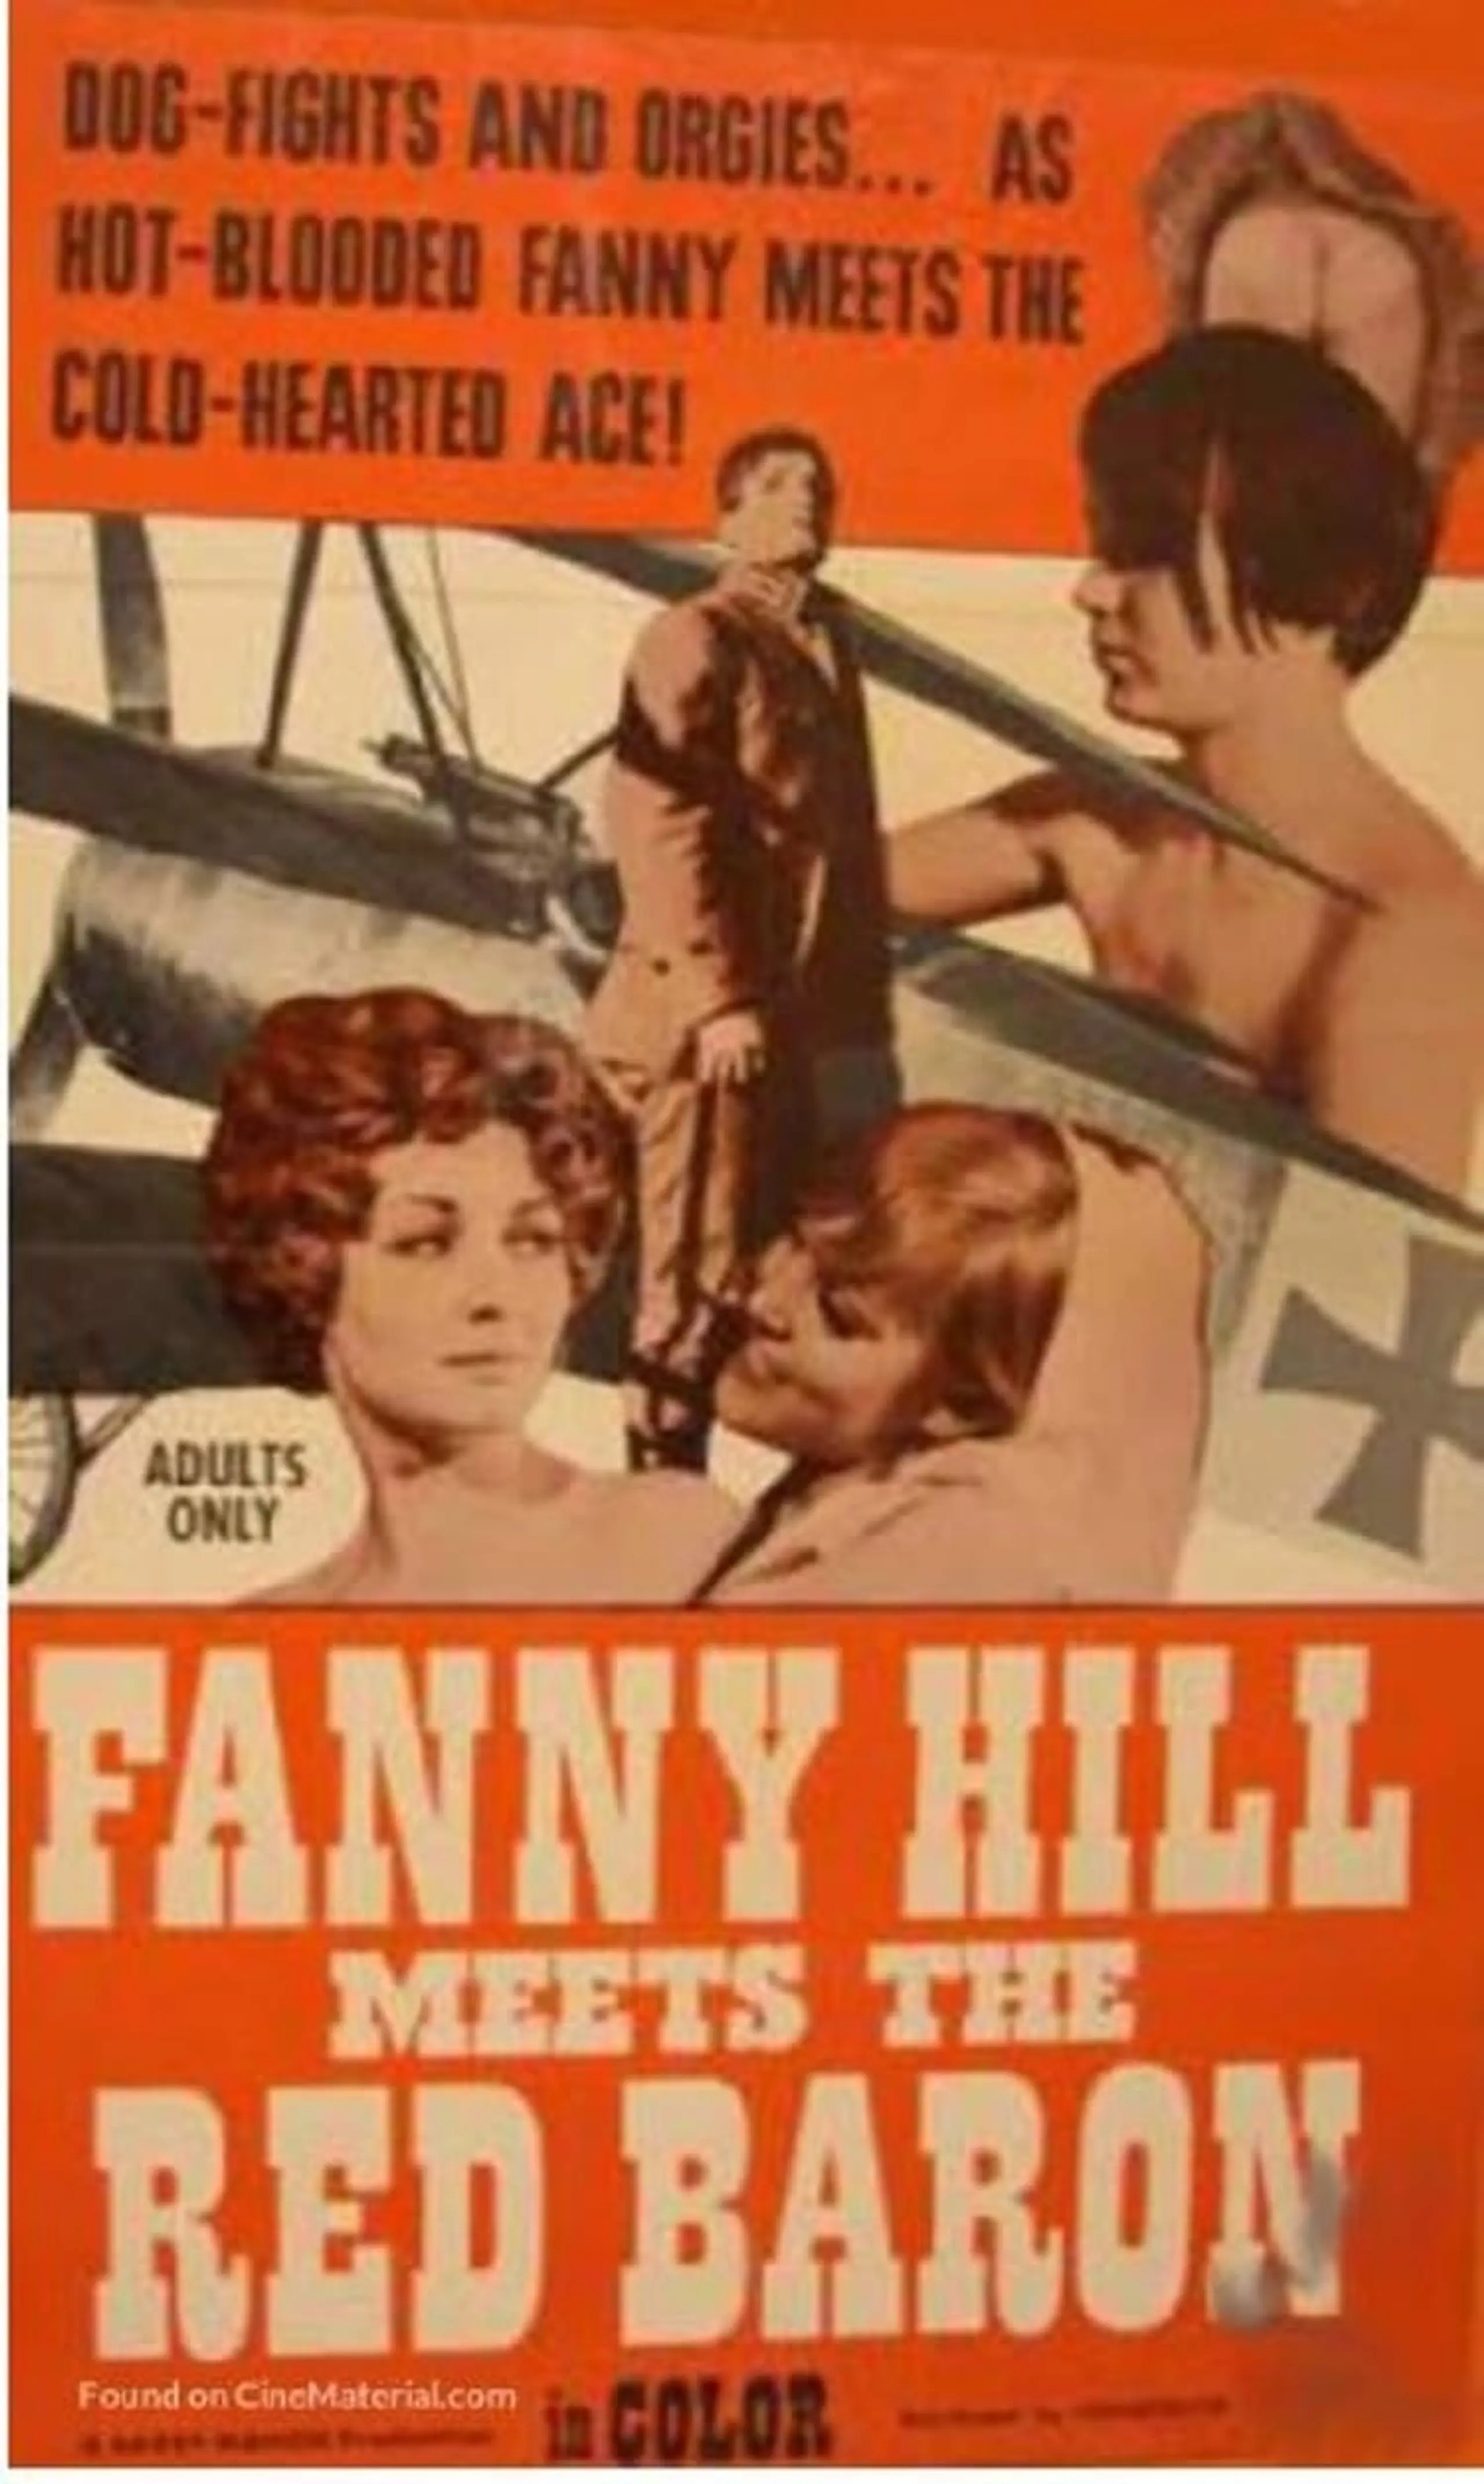 Fanny Hill Meets the Red Baron